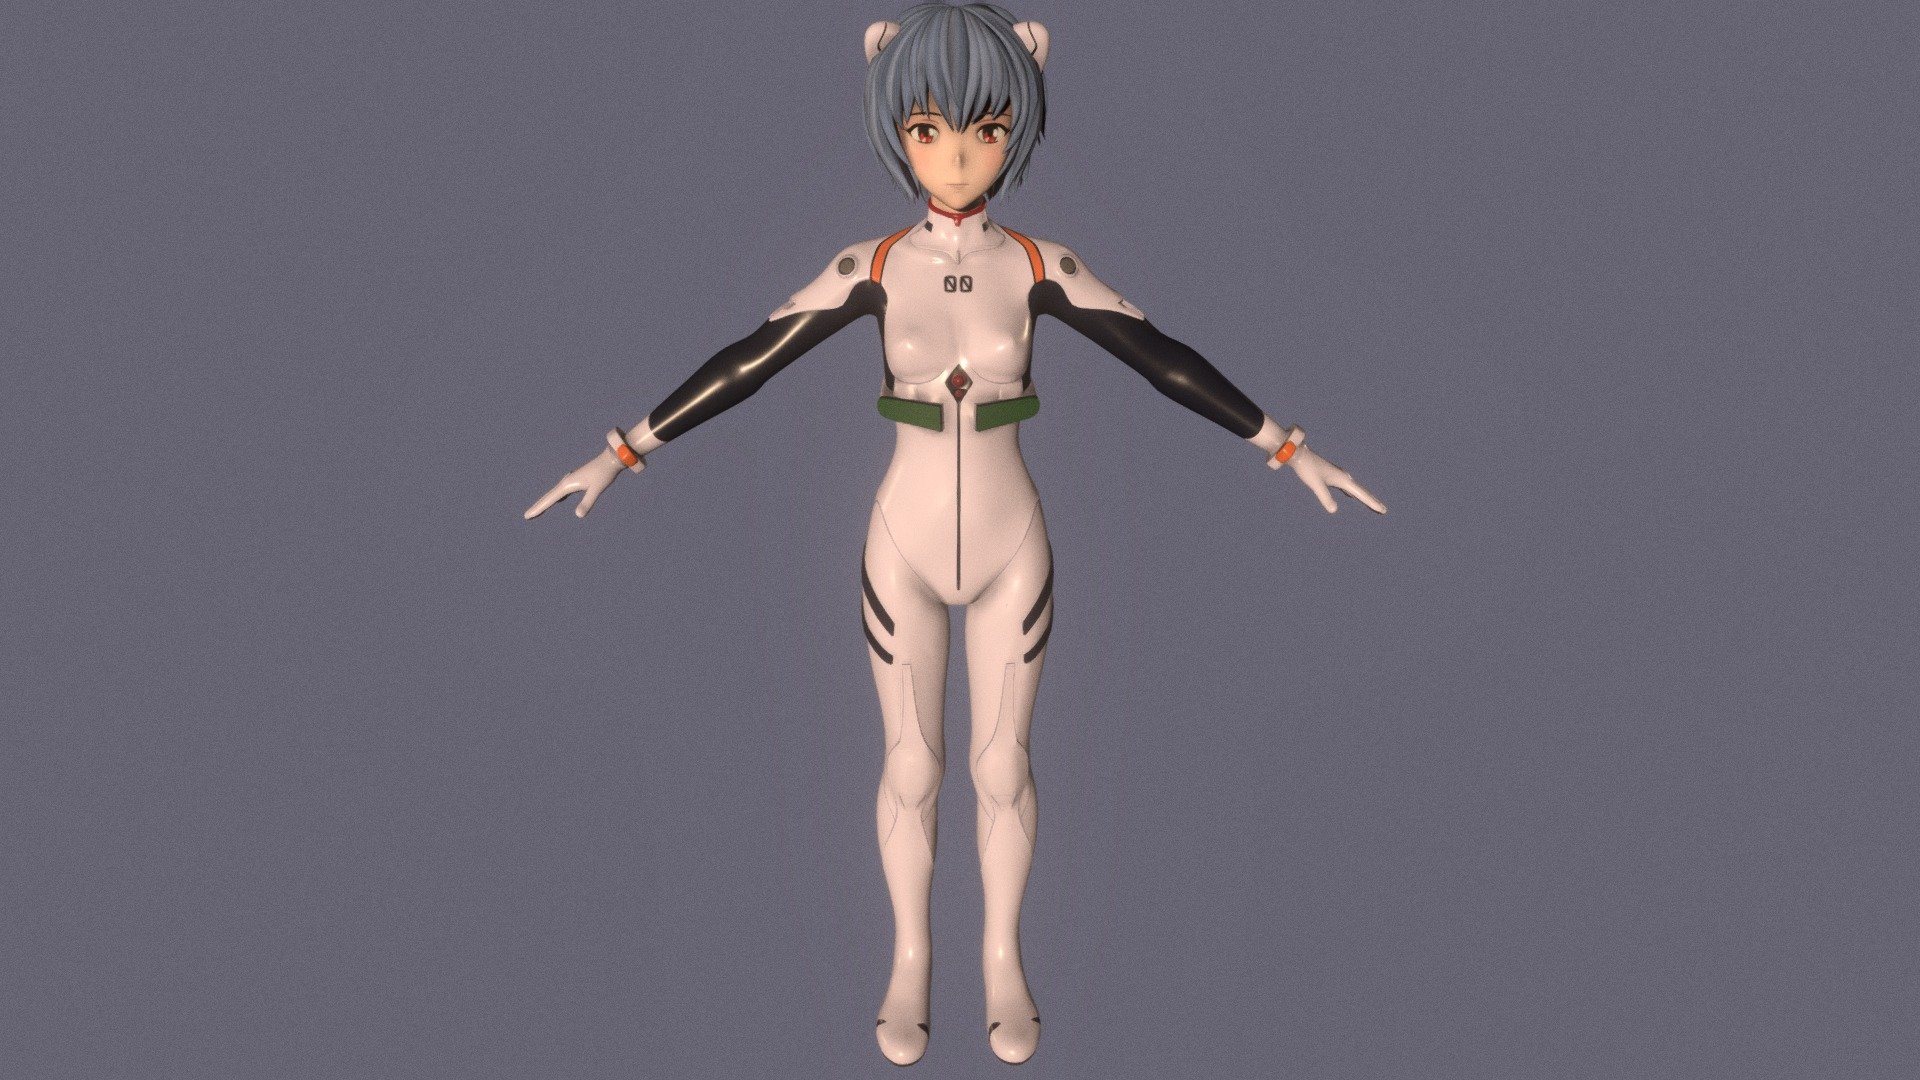 T-pose rigged model of anime girl Rei Ayanami (Neon Genesis Evangelion).

Body and clothings are rigged and skinned by 3ds Max CAT system.

Eye direction and facial animation controlled by Morpher modifier / Shape Keys / Blendshape.

This product include .FBX (ver. 7200) and .MAX (ver. 2010) files.

3ds Max version is turbosmoothed to give a high quality render (as you can see here).

Original main body mesh have ~7.000 polys.

This 3D model may need some tweaking to adapt the rig system to games engine and other platforms.

I support convert model to various file formats (the rig data will be lost in this process): 3DS; AI; ASE; DAE; DWF; DWG; DXF; FLT; HTR; IGS; M3G; MQO; OBJ; SAT; STL; W3D; WRL; X.

You can buy all of my models in one pack to save cost: https://sketchfab.com/3d-models/all-of-my-anime-girls-c5a56156994e4193b9e8fa21a3b8360b

And I can make commission models.

If you have any questions, please leave a comment or contact me via my email 3d.eden.project@gmail.com 3d model